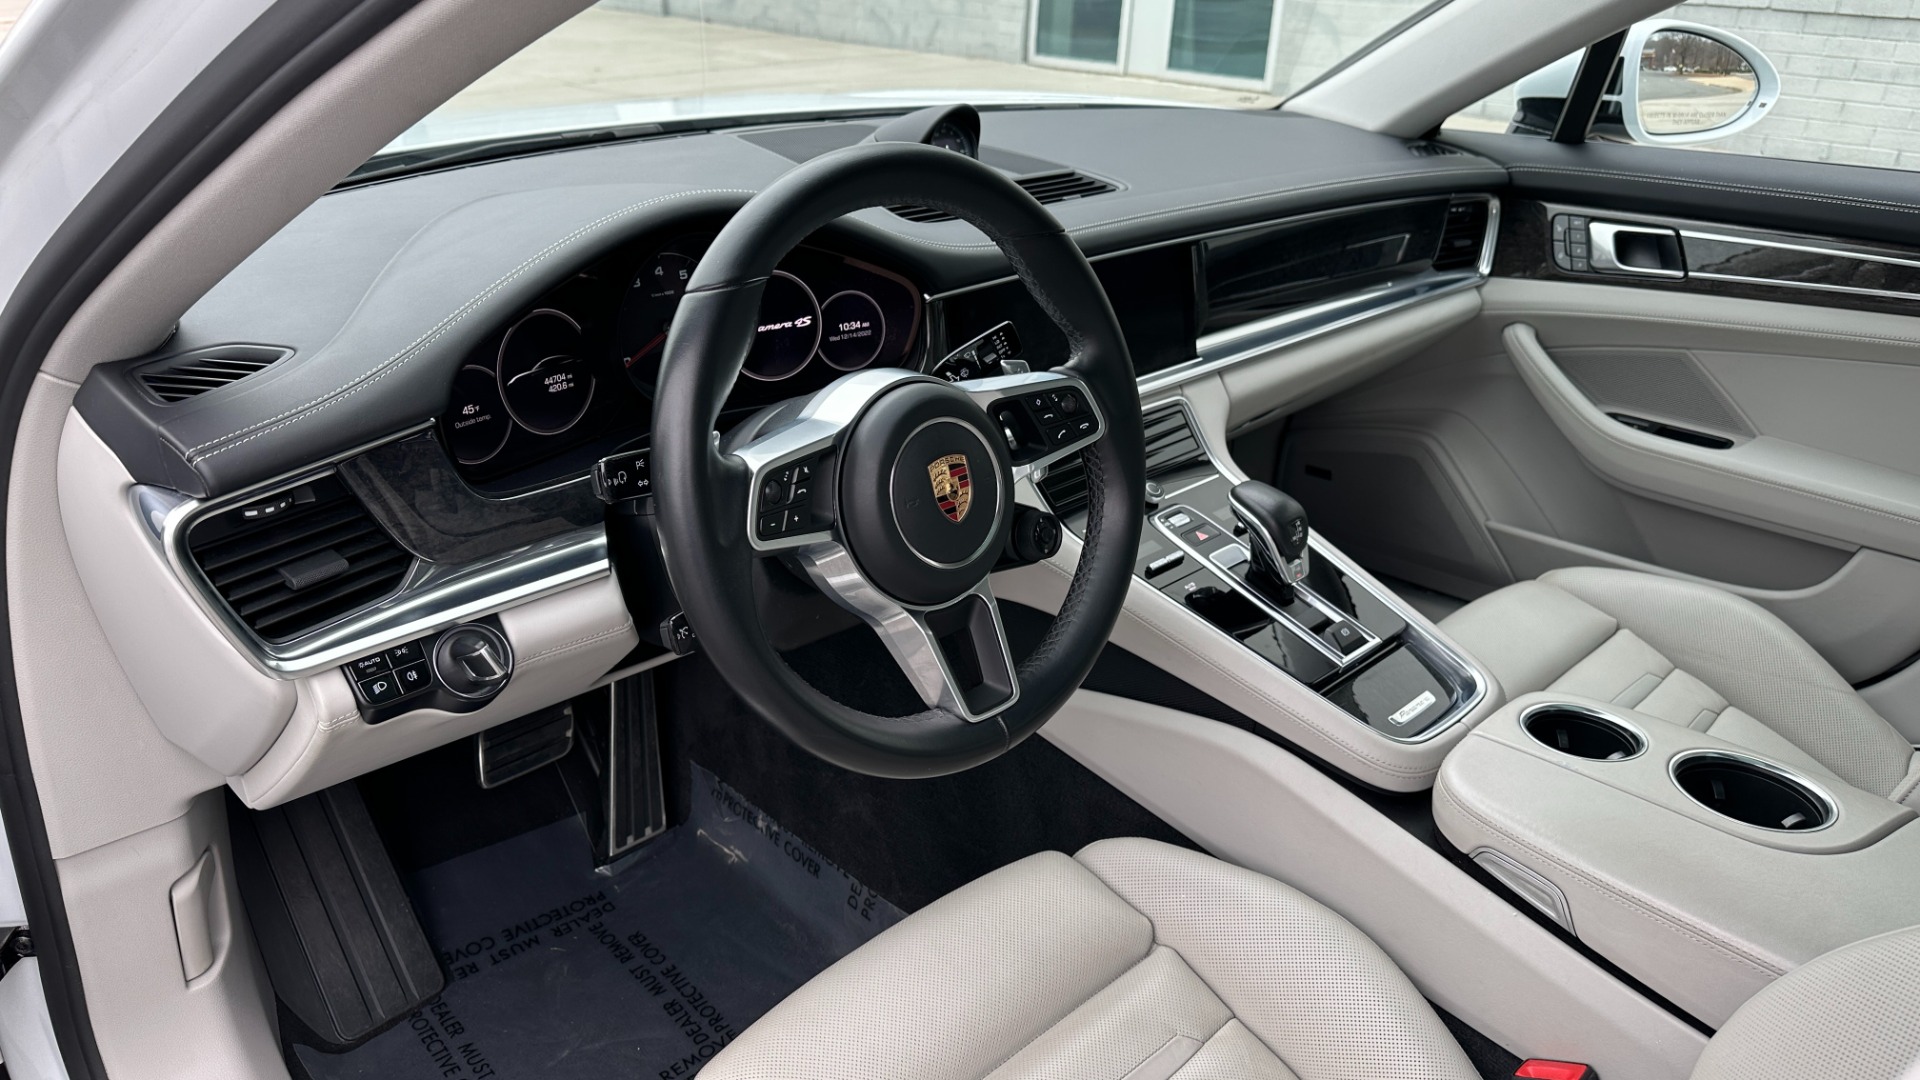 Used 2017 Porsche Panamera 4S / PREMIUM PLUS / AIR SUSPENSION / SPORT CHRONO / 21IN WHEELS for sale $74,000 at Formula Imports in Charlotte NC 28227 13